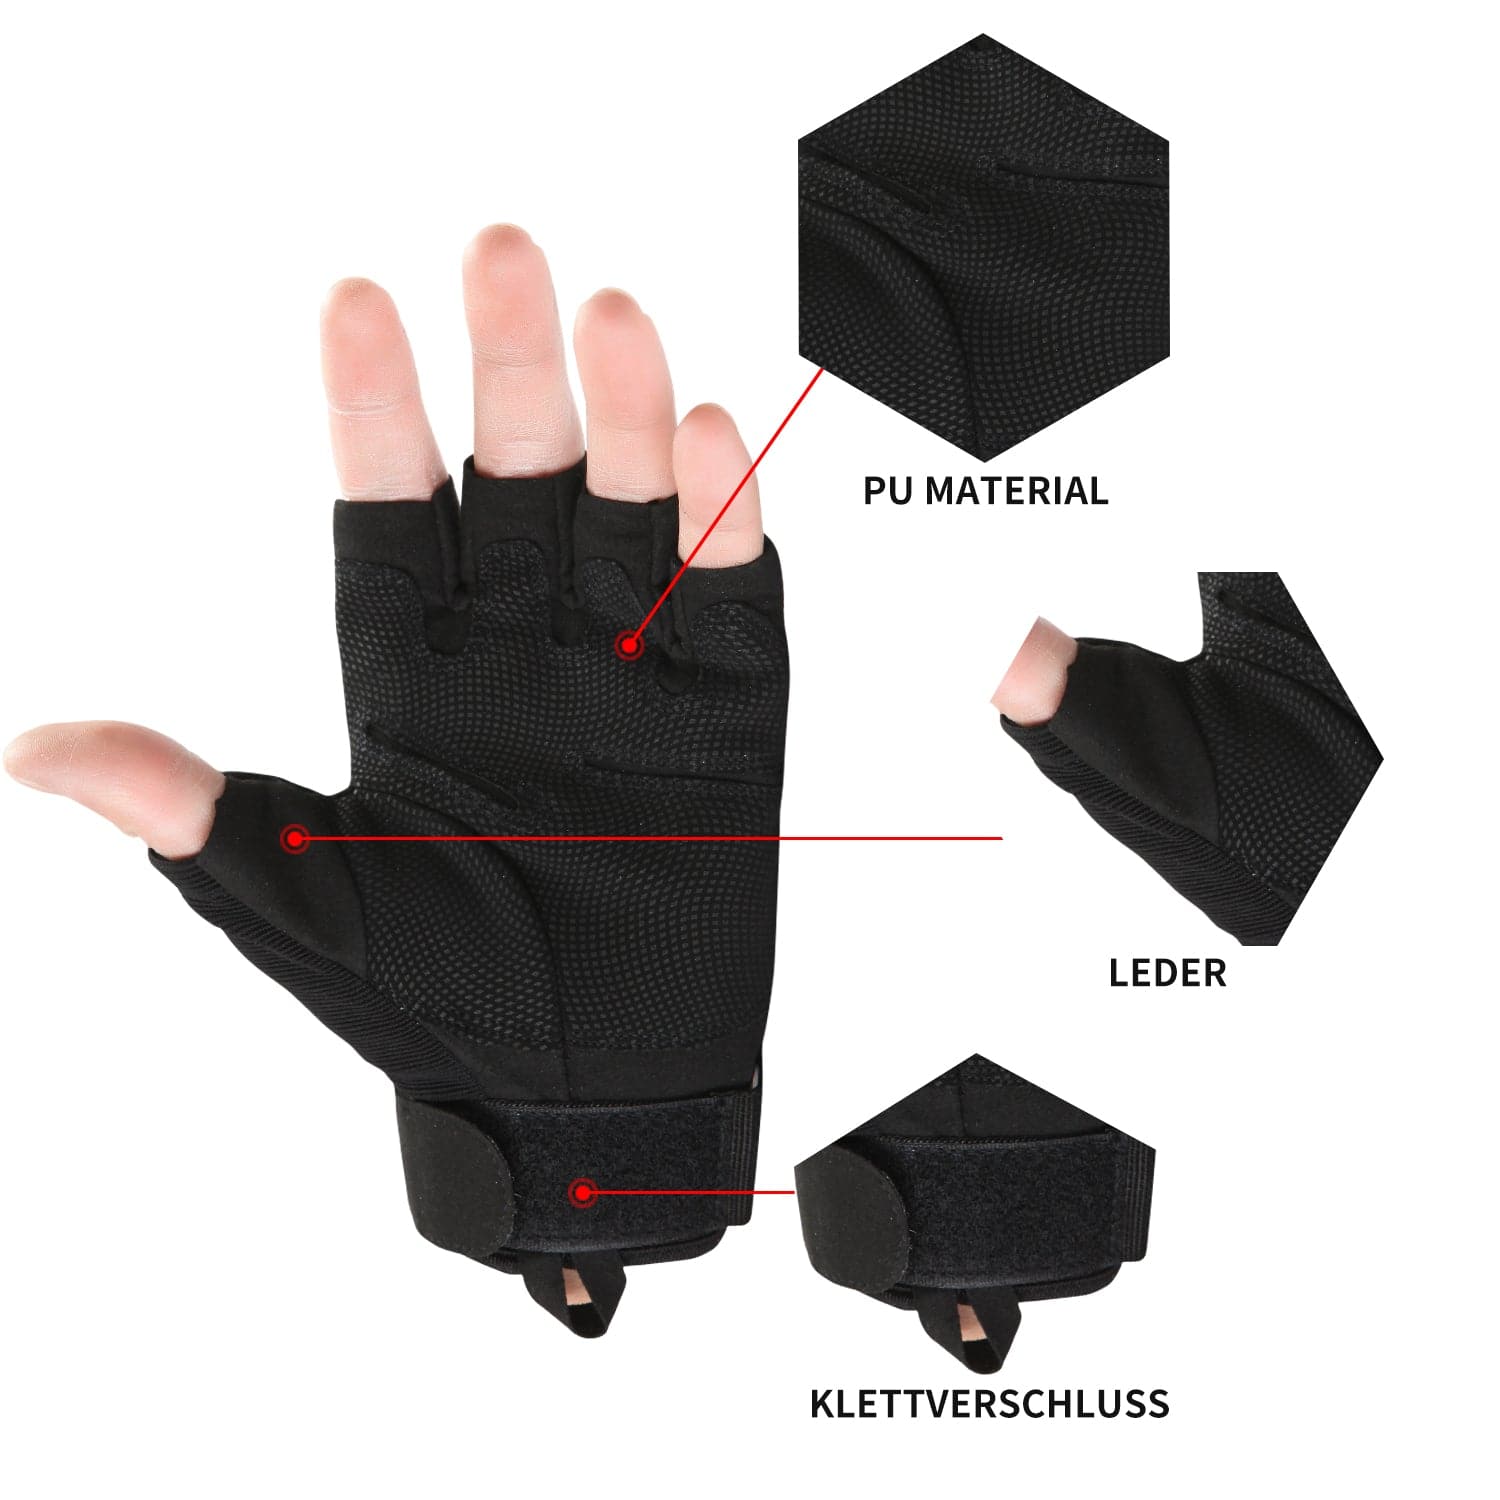 Tactical Combat Gloves For Outdoor Motorcycle Cycling